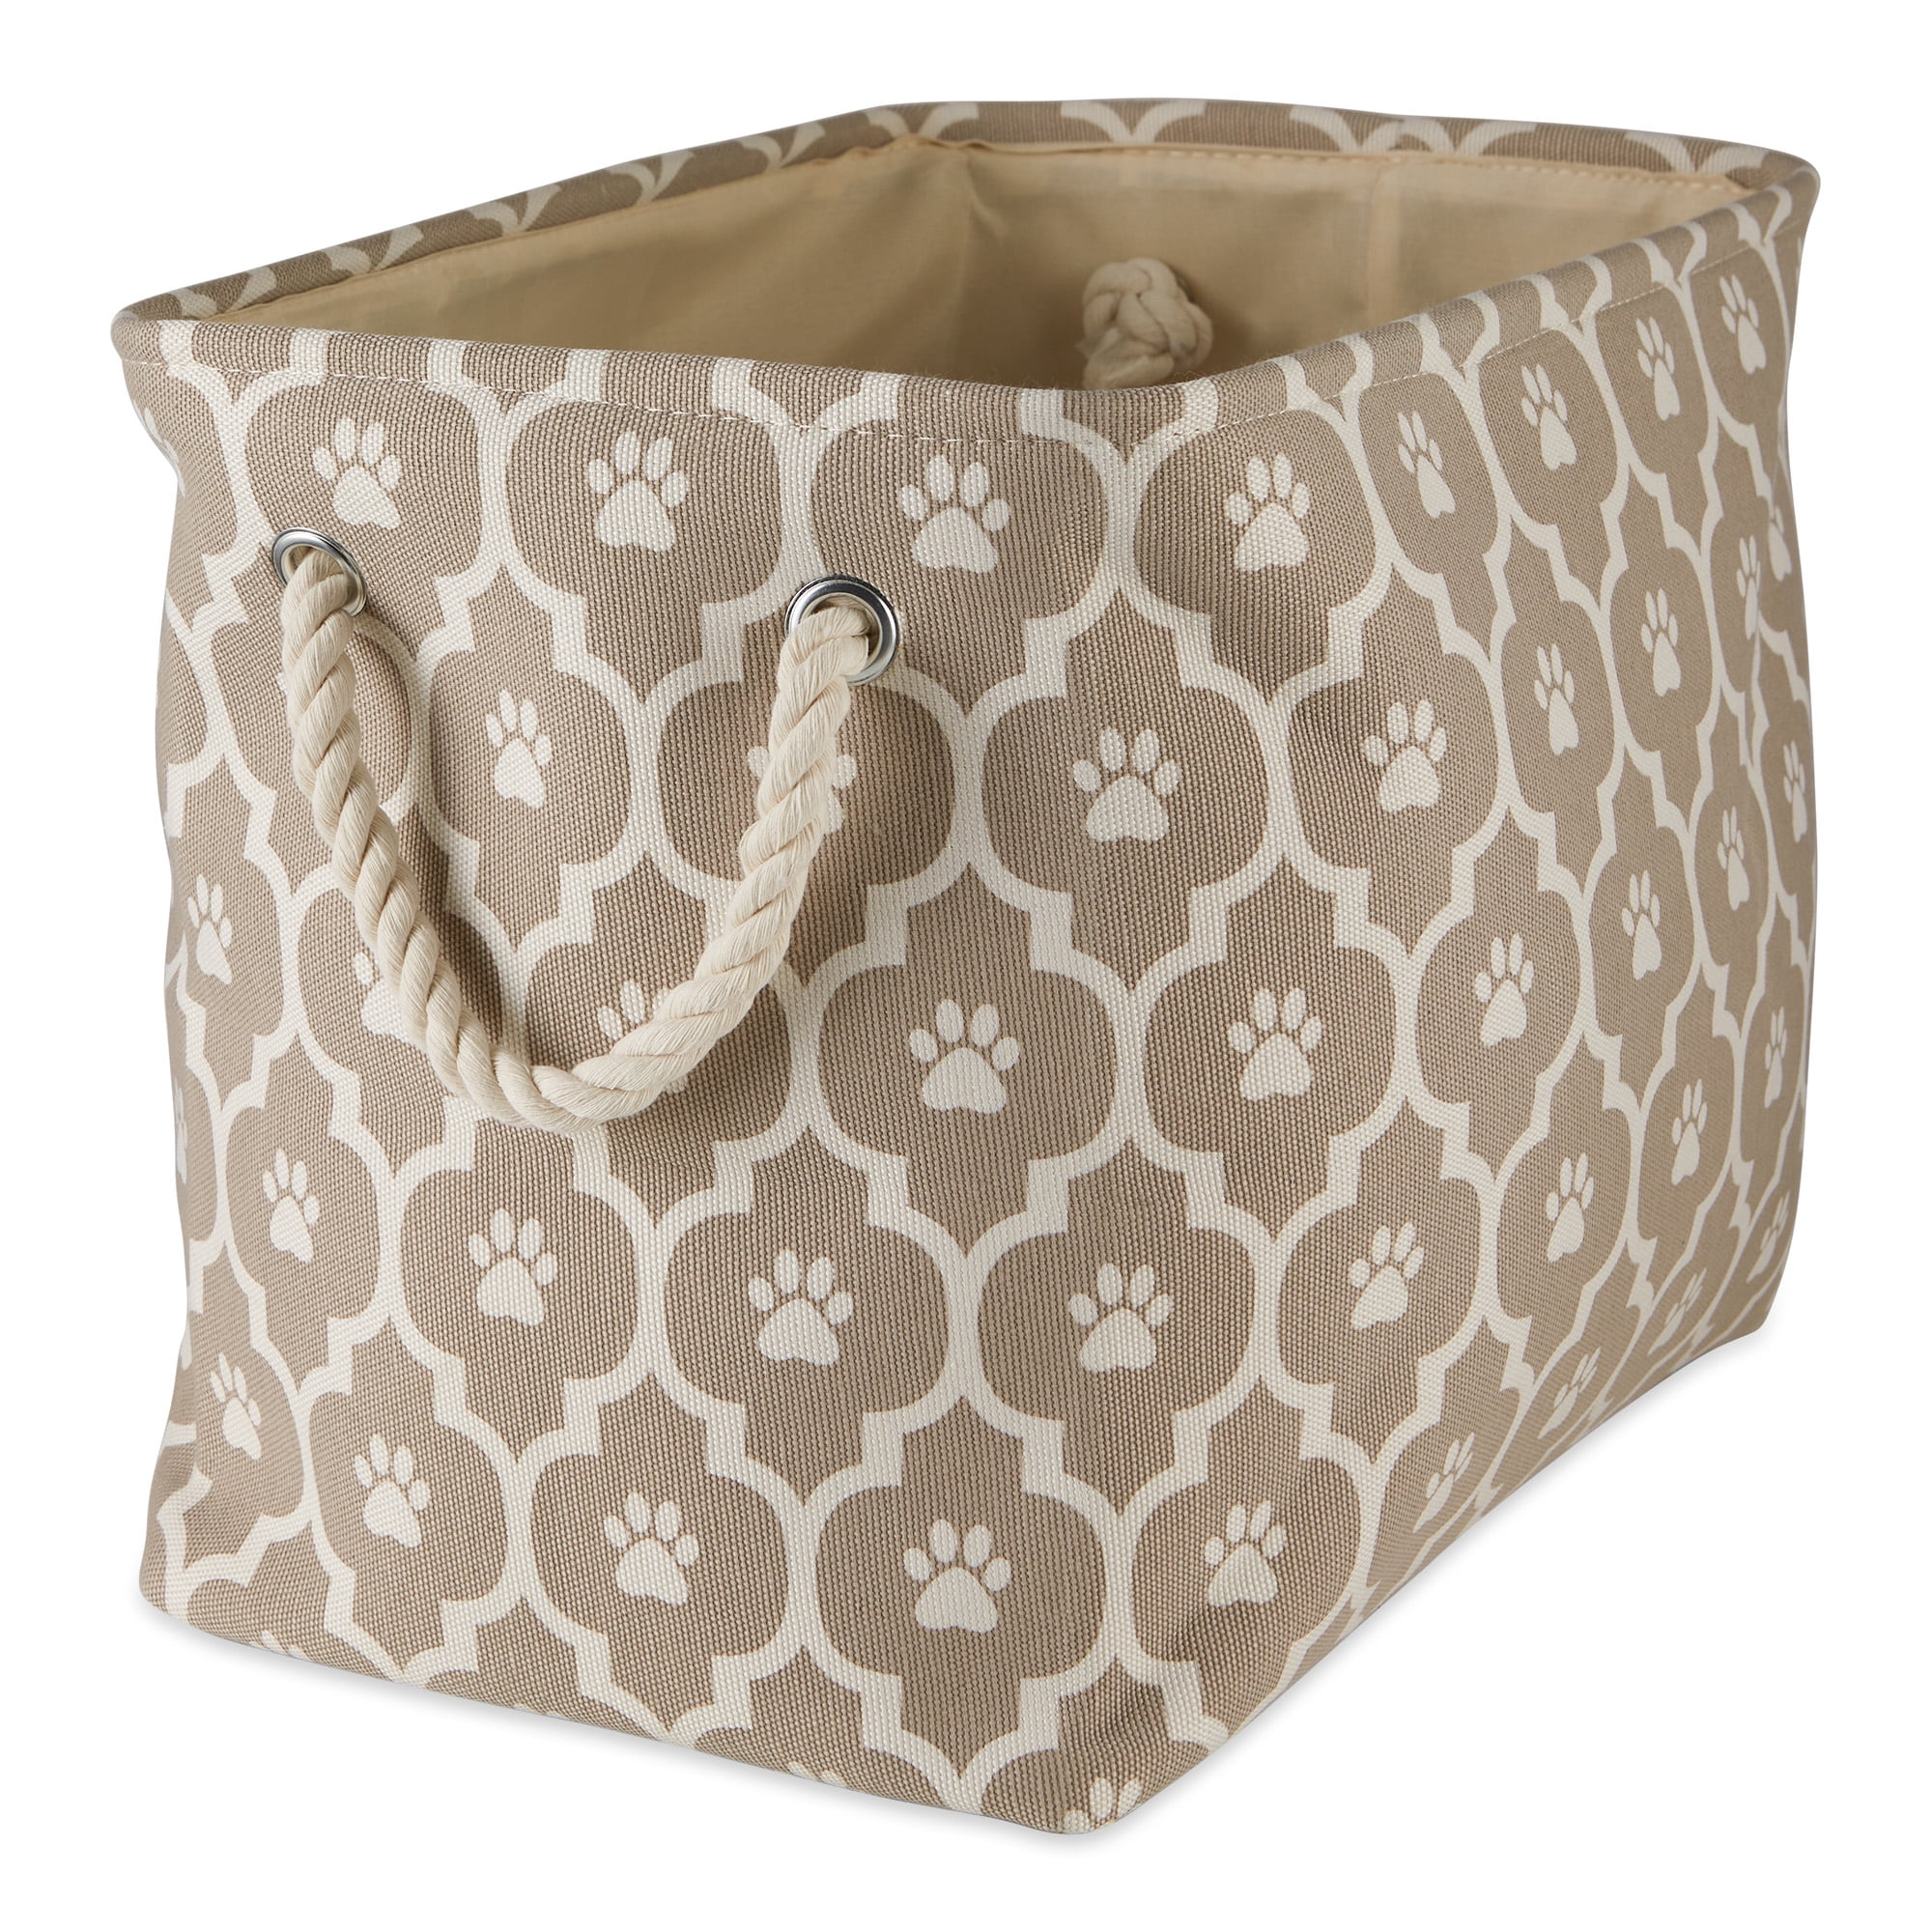 Picture of Design Imports CAMZ12547 Lattice Paw Rectangle Polyester Pet Bin, Stone - Large